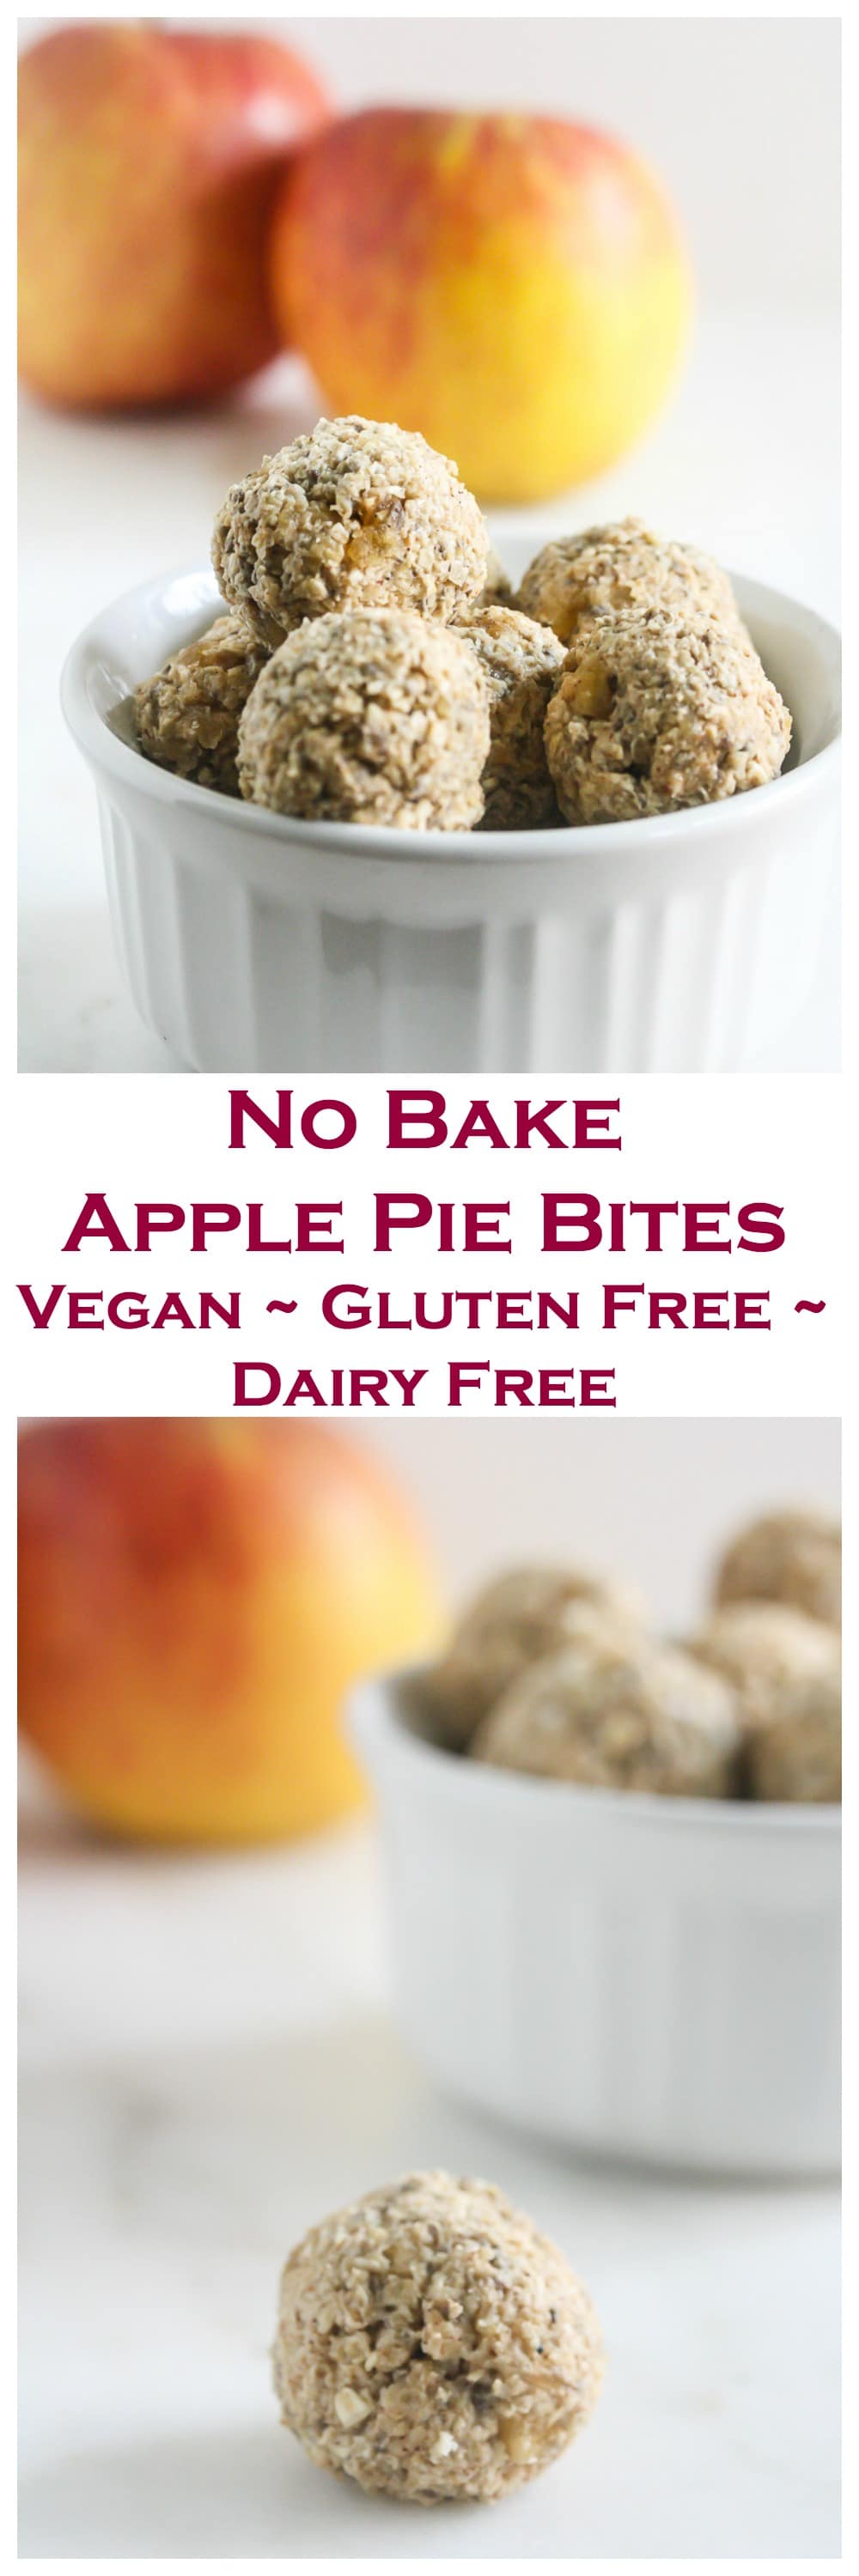 These Apple Pie Bites are made with wholesome ingredients that taste like apple pie minus all the calories and fat! {V, GF, DF}